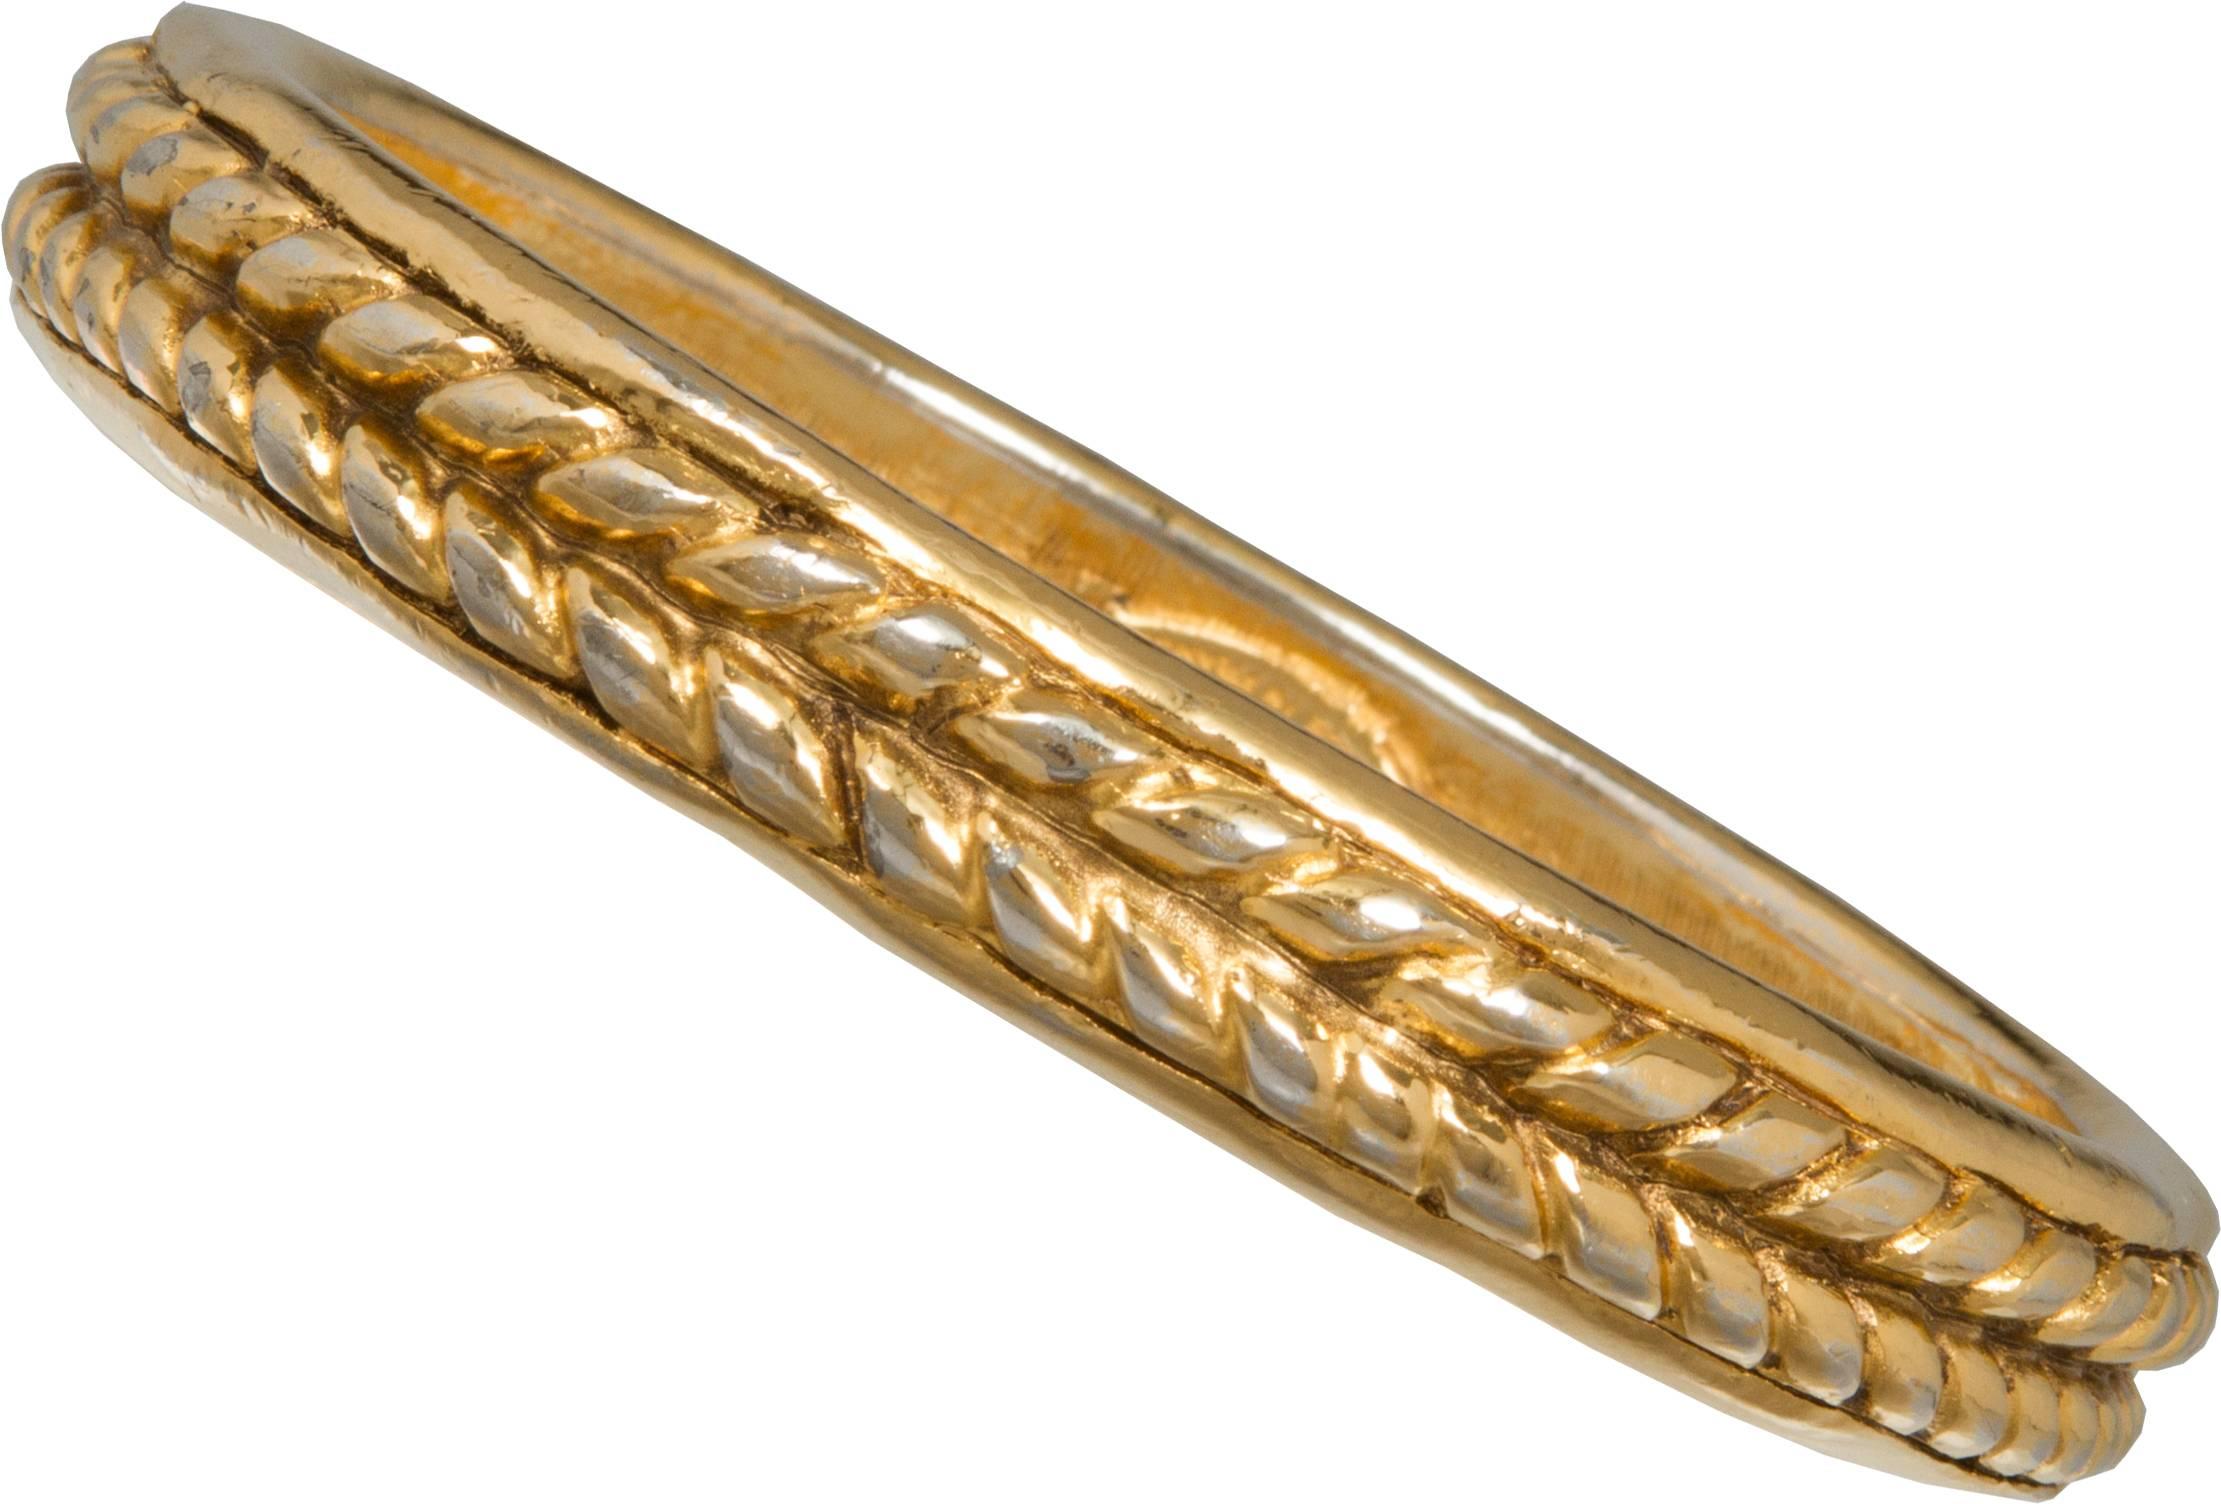 This is a wonderful bangle that looks great on its own, or stacked with other bracelets.  Heavy and richly plated gold, the interior dimension is 2.63.